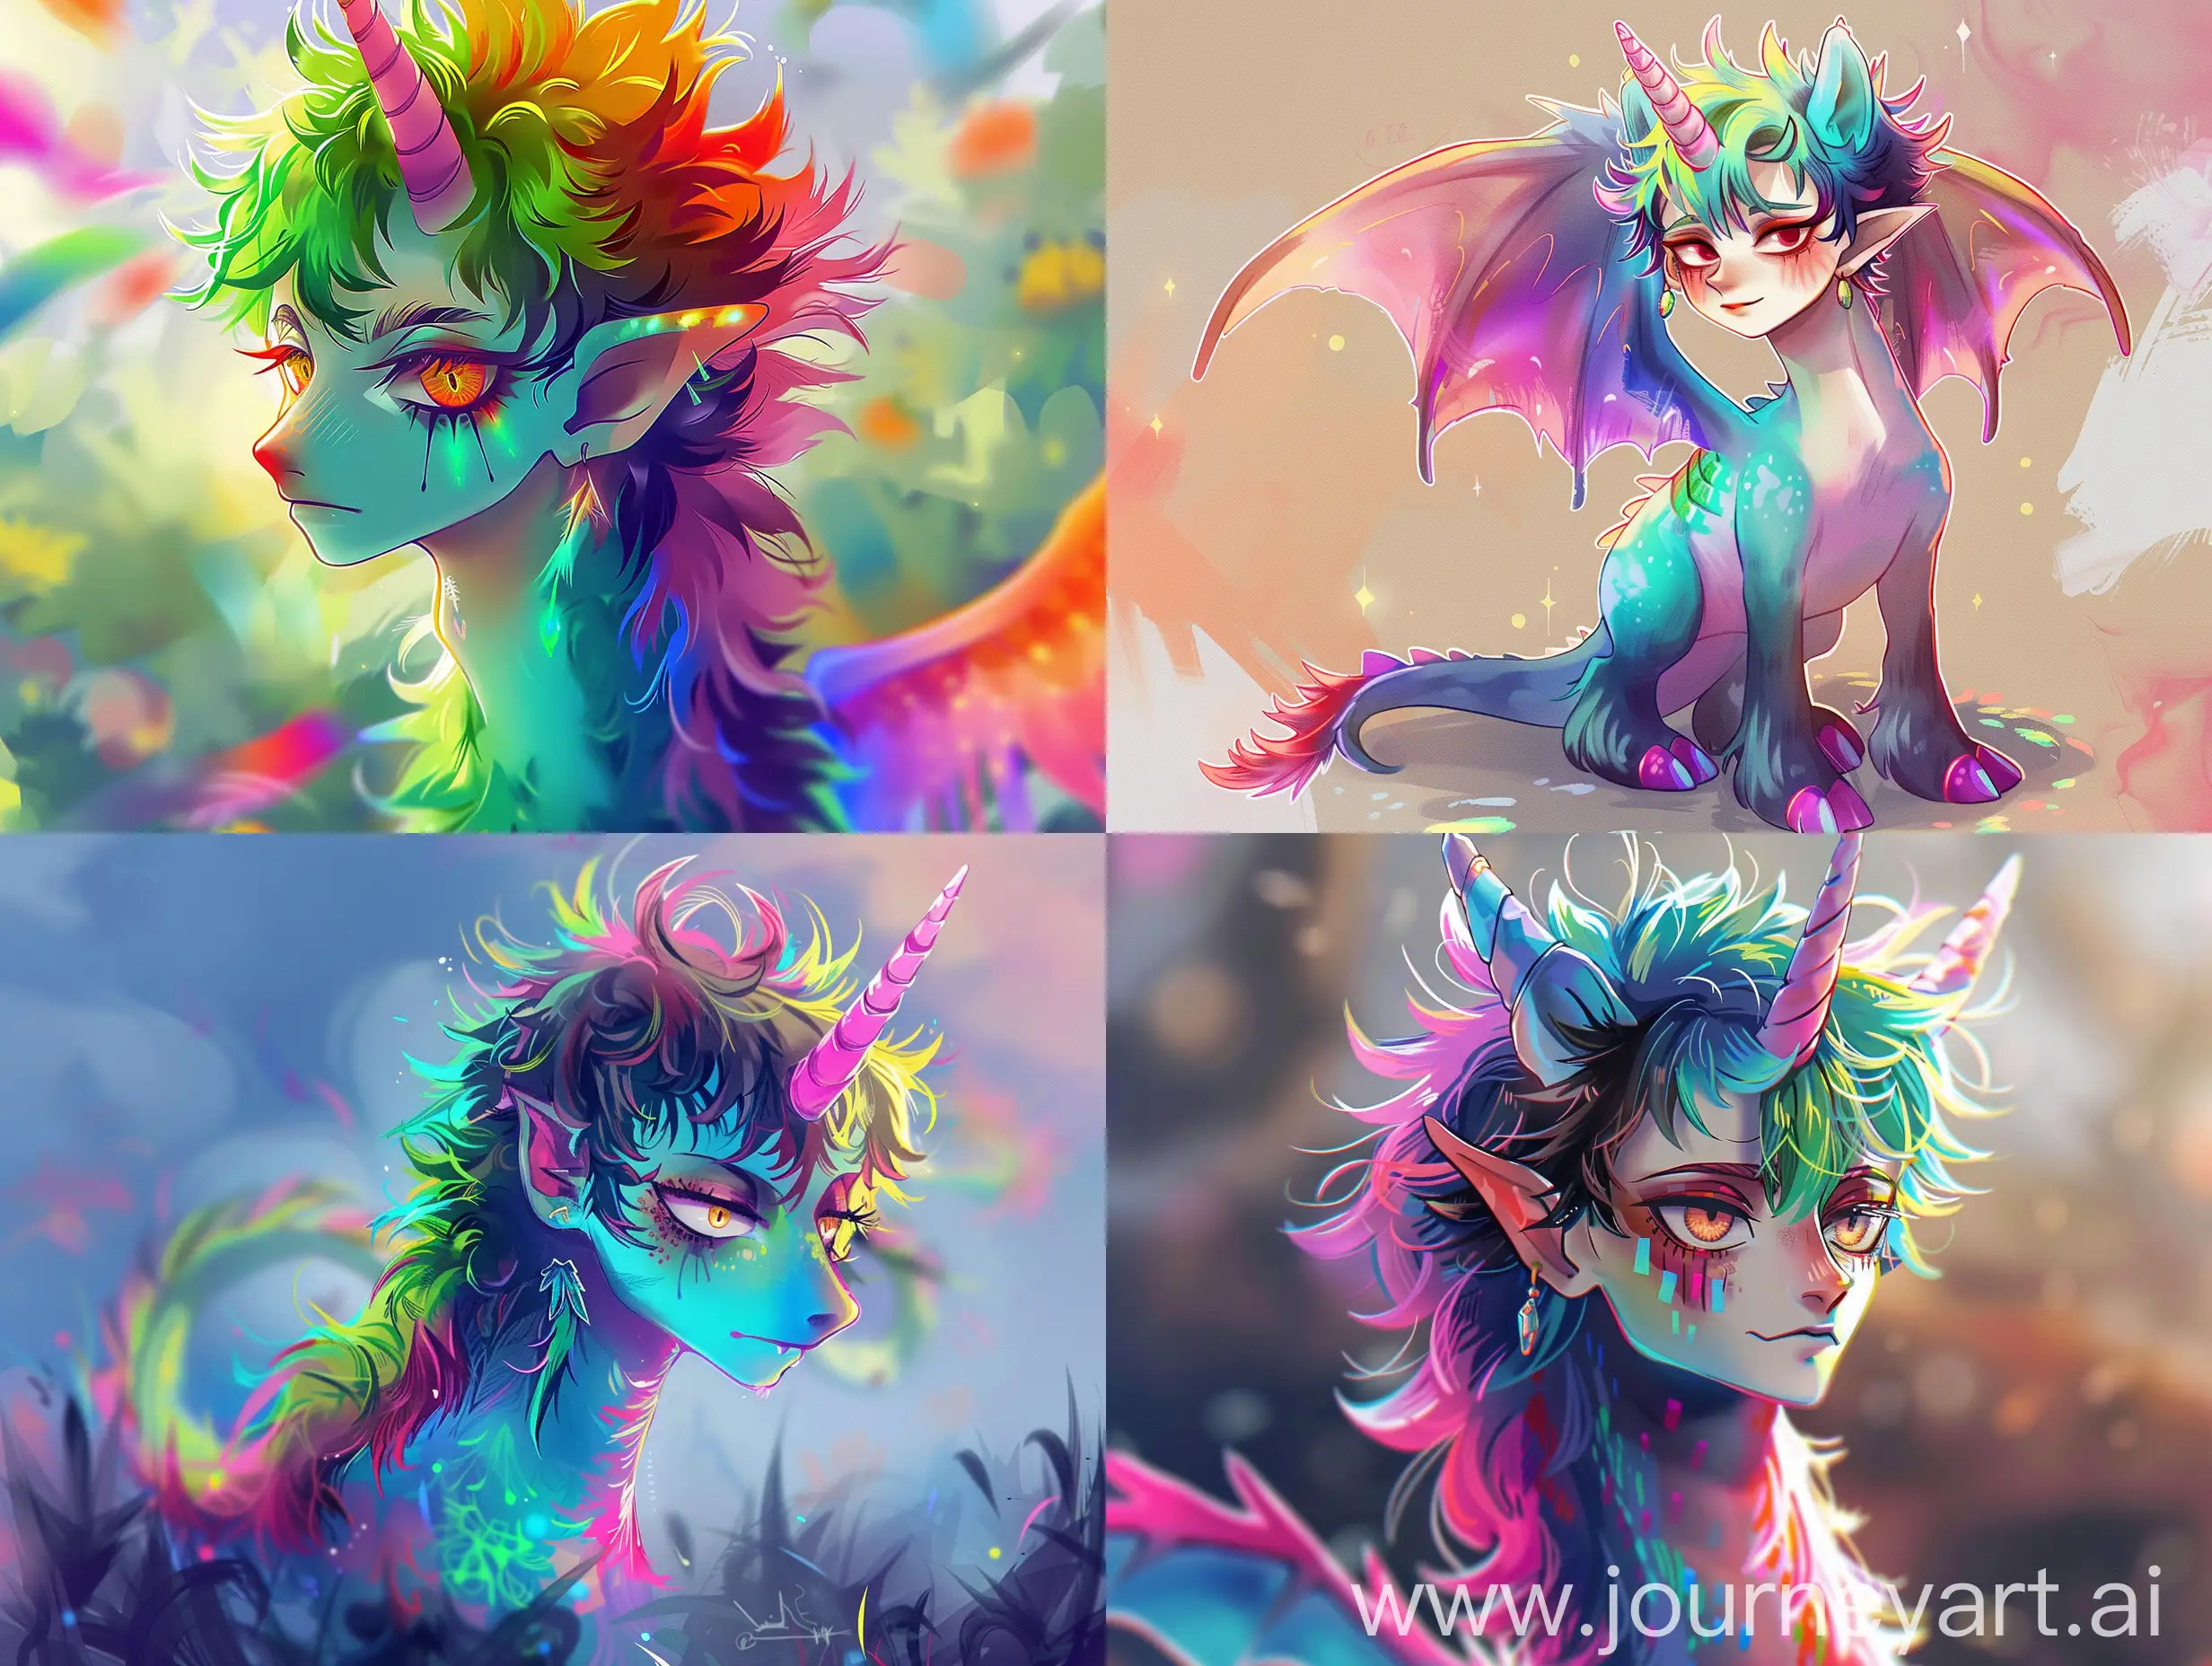 Pony character, adopt, dragon, bright colors, details